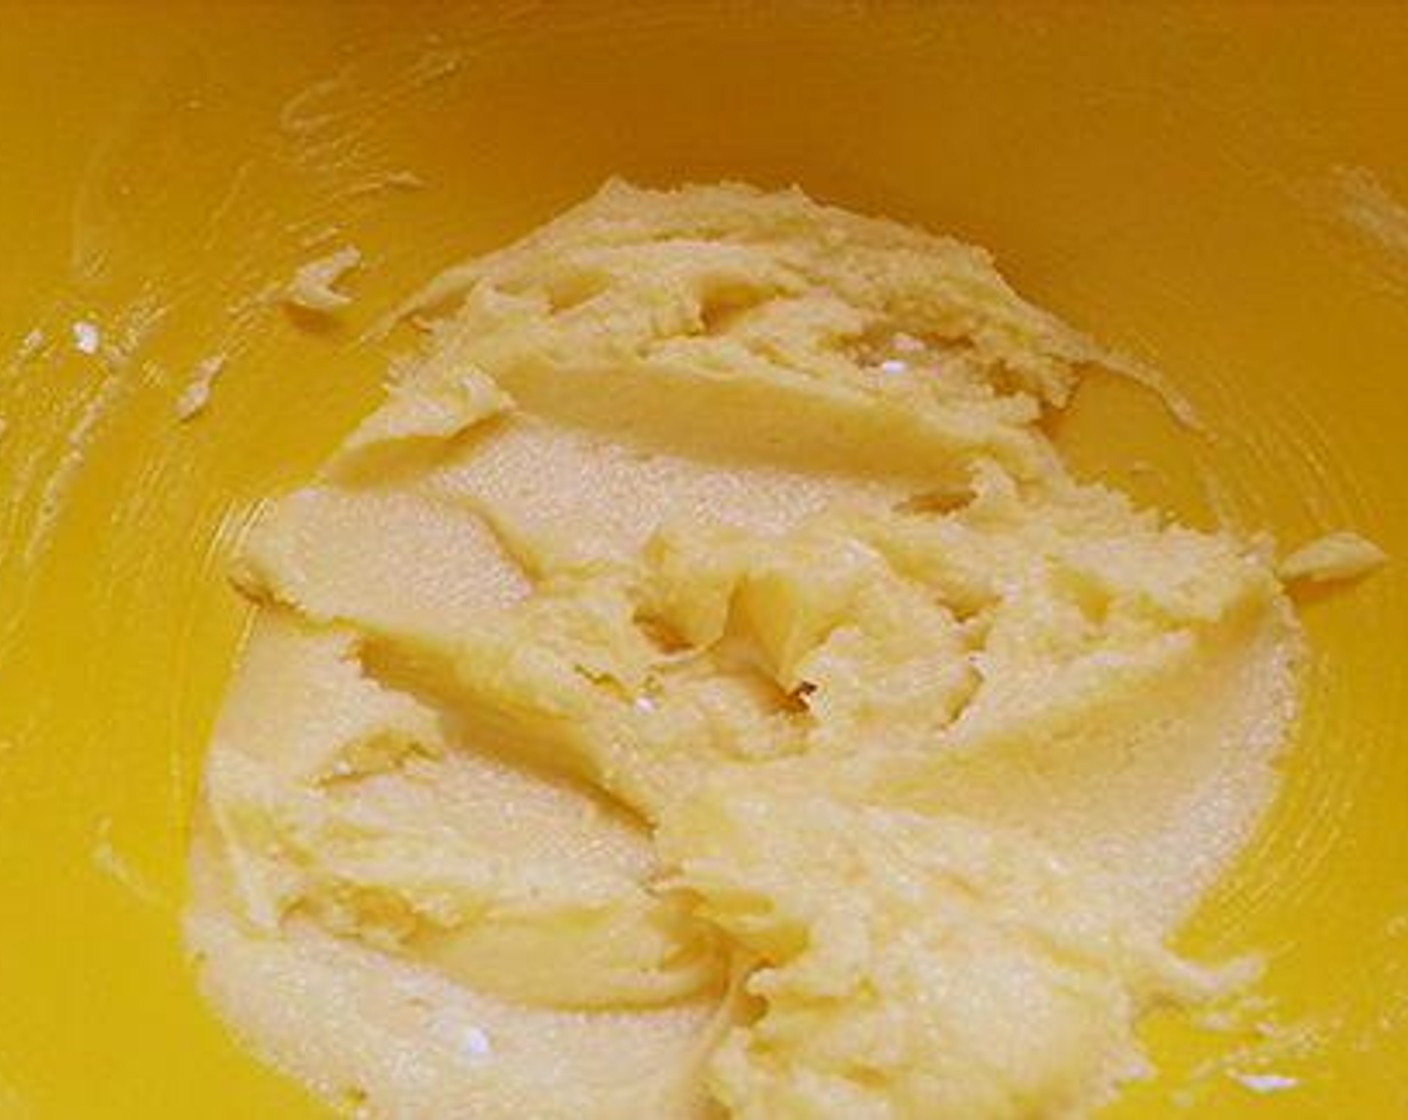 step 3 Combine the remaining All-Purpose Flour (1 1/2 cups), Baking Powder (1 tsp), and Baking Soda (1/2 tsp). Sieve it and keep aside. To a bowl, add Butter (3/4 cup) and Powdered Confectioners Sugar (3/4 cup). Beat well until soft.